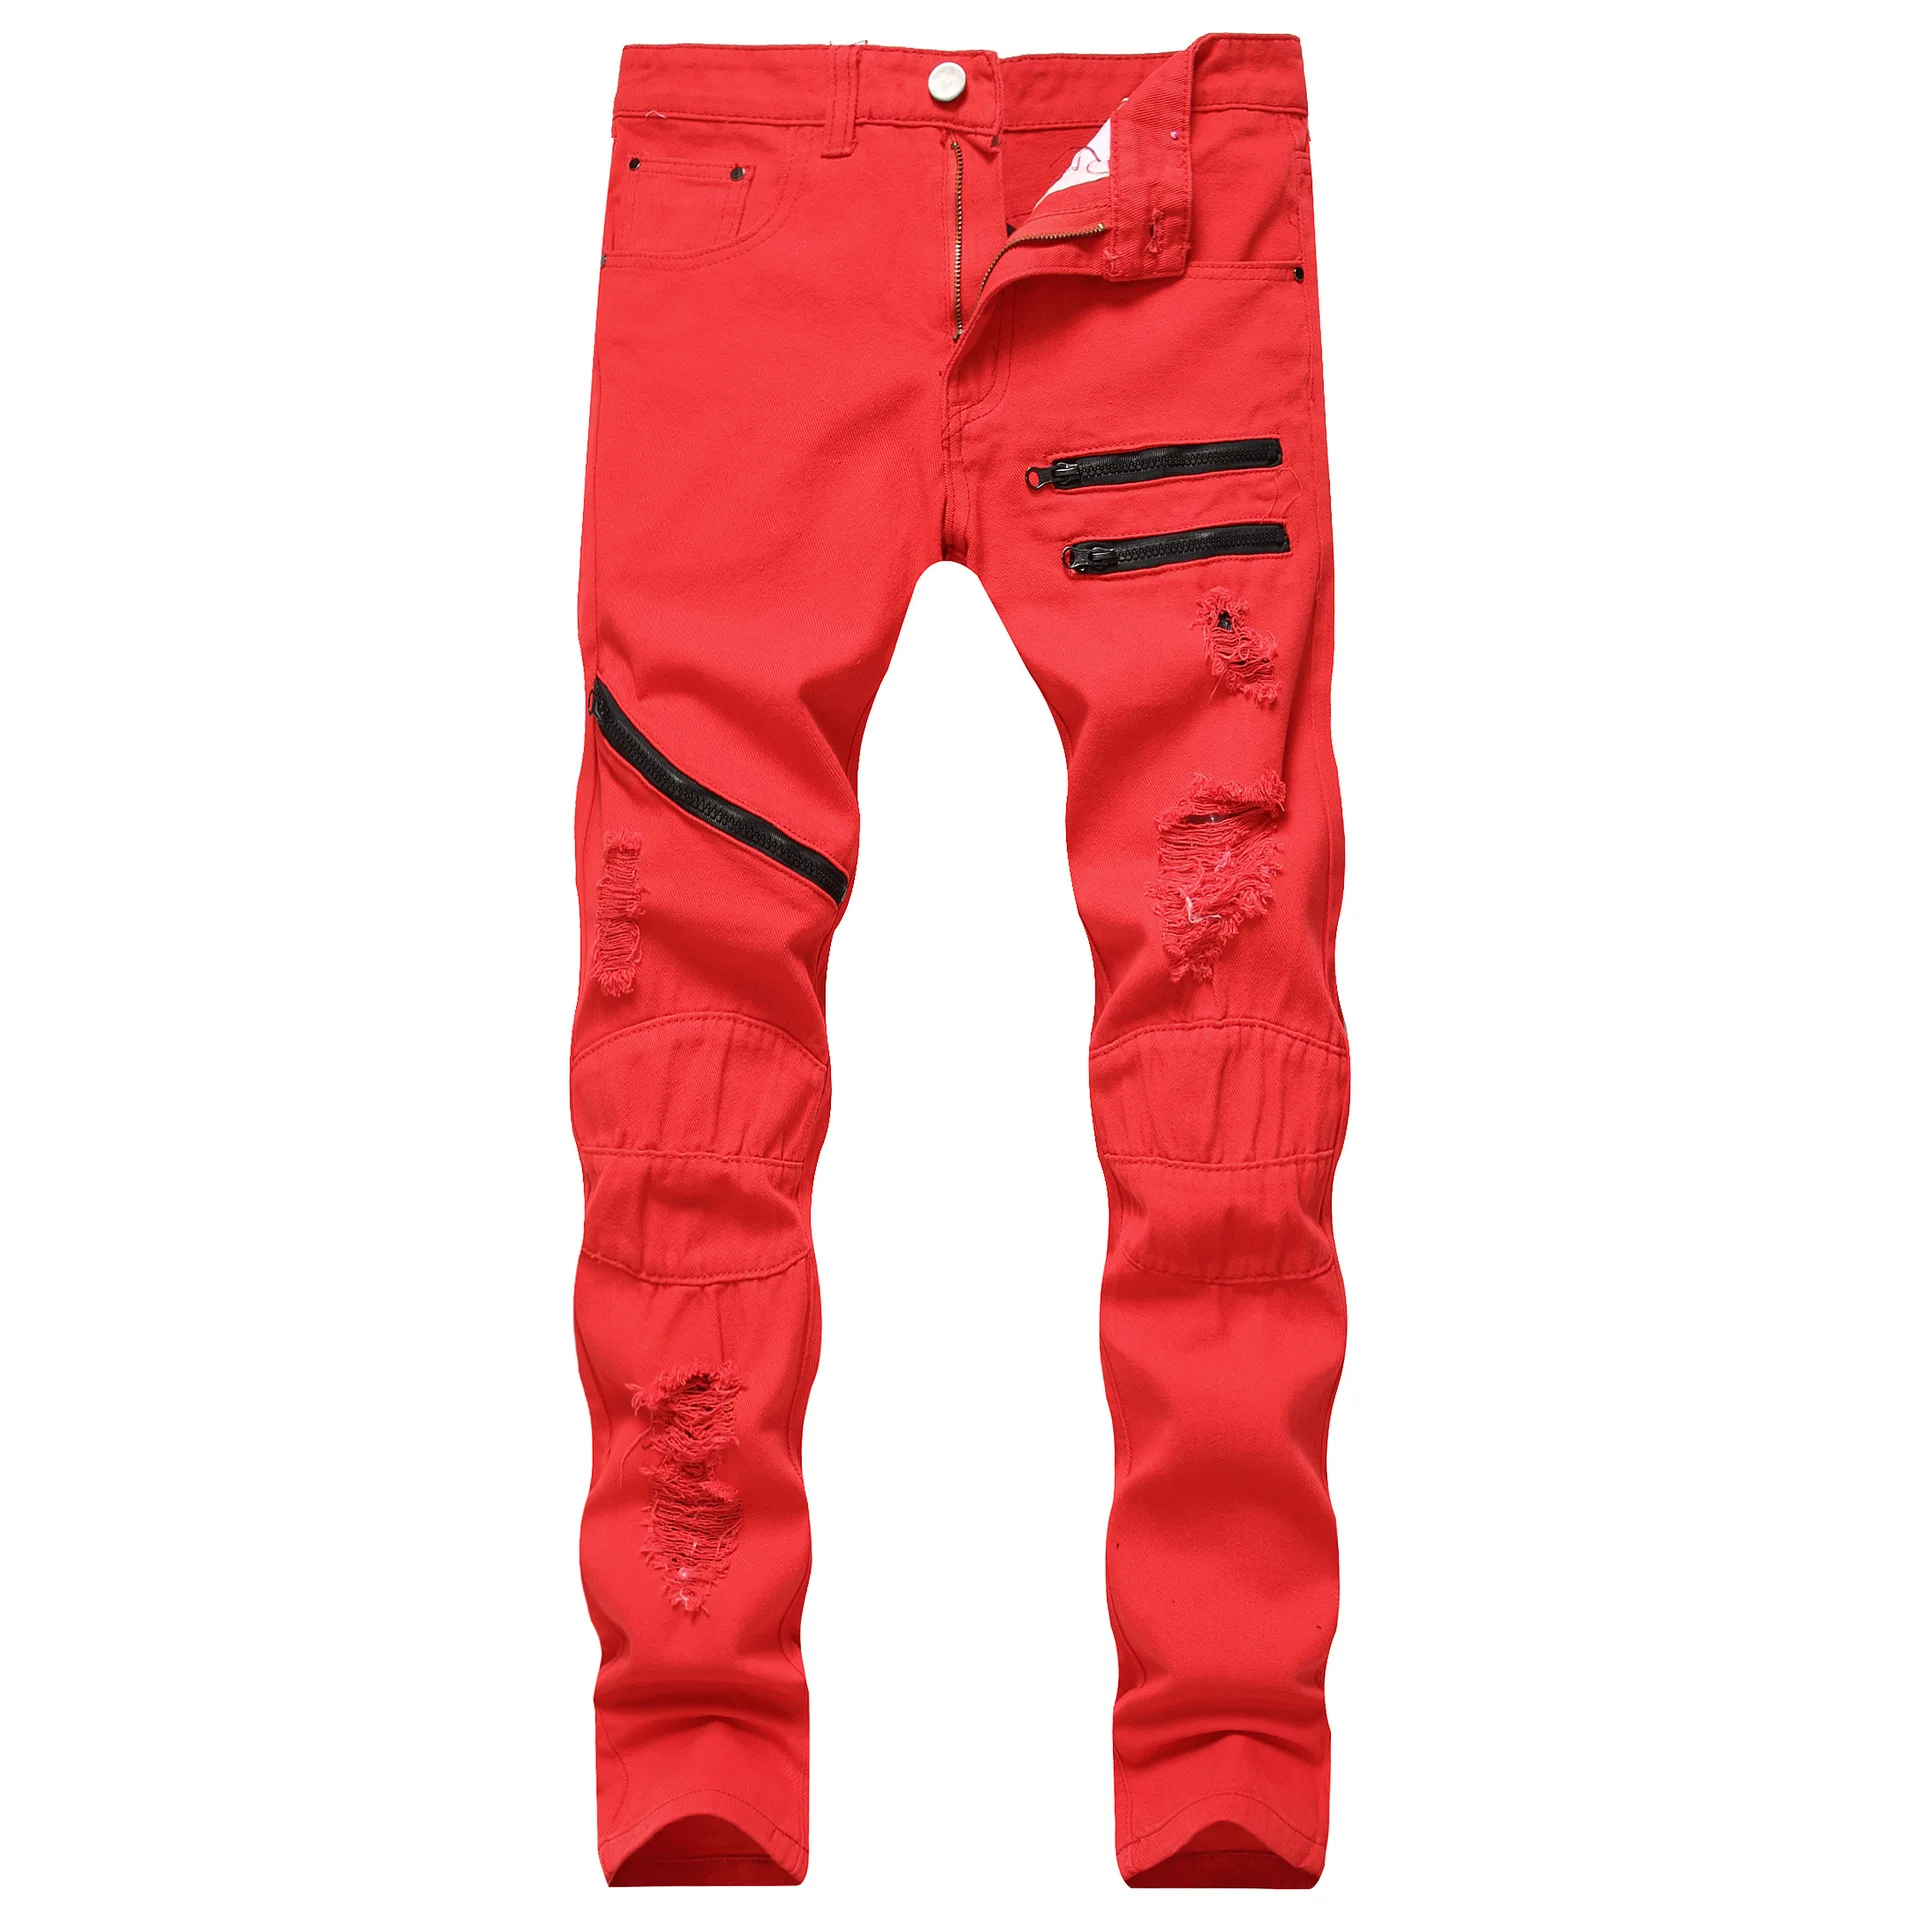 2023 Spring New Mens Hole Denim Trousers Fashion Ripped Red Jeans Hip Hop Vintage Skinny Jeans Man Zip Up Casual Jean Homme 바지